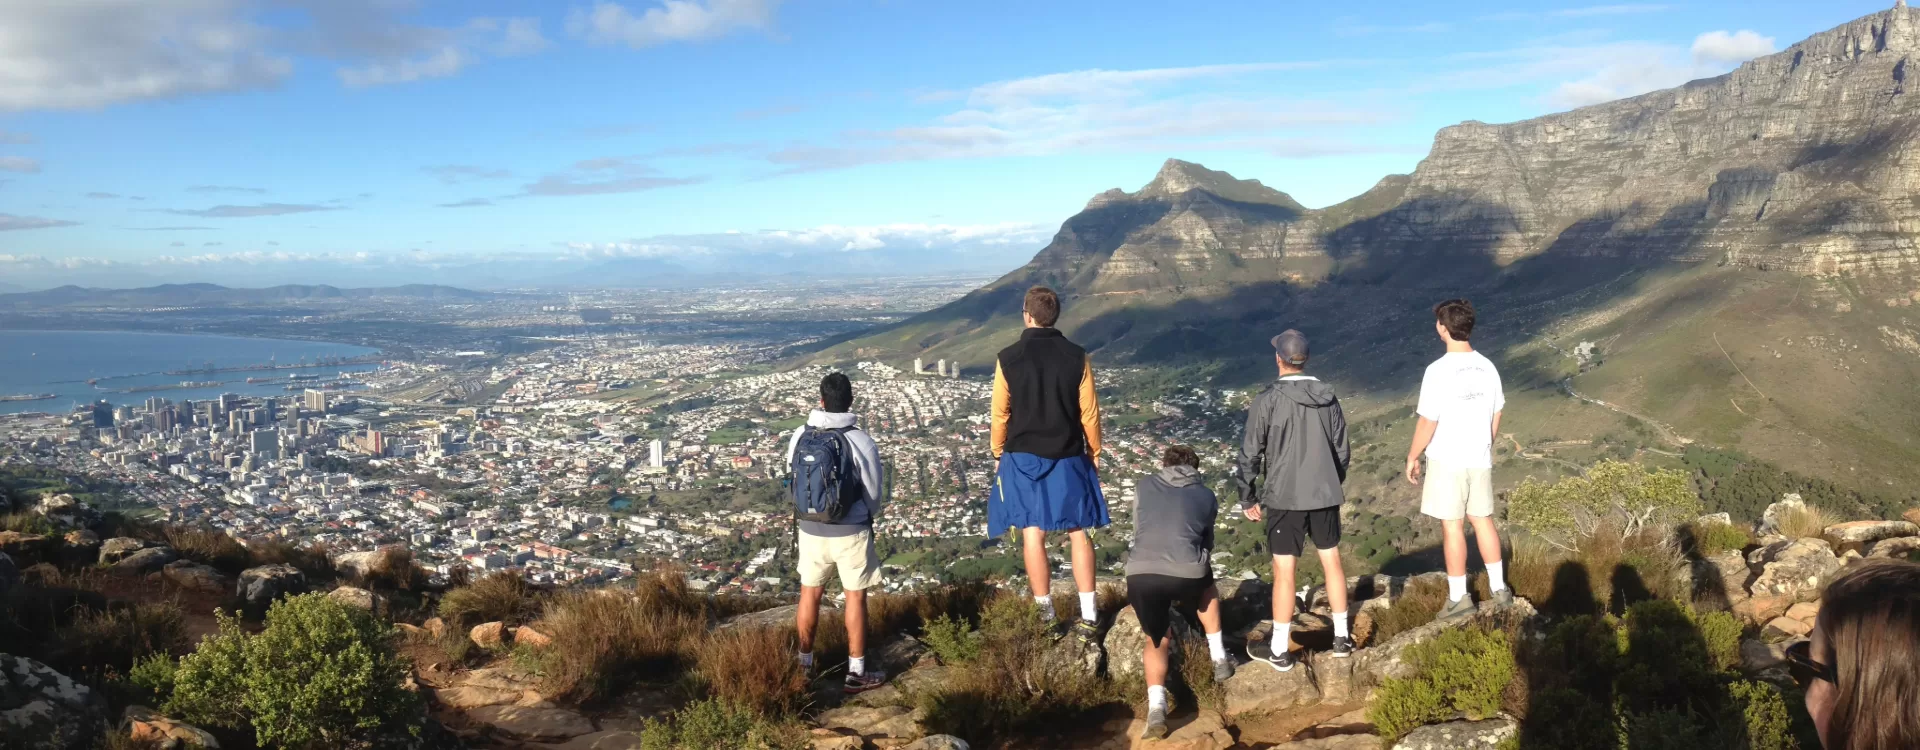 Things To Do In Cape Town